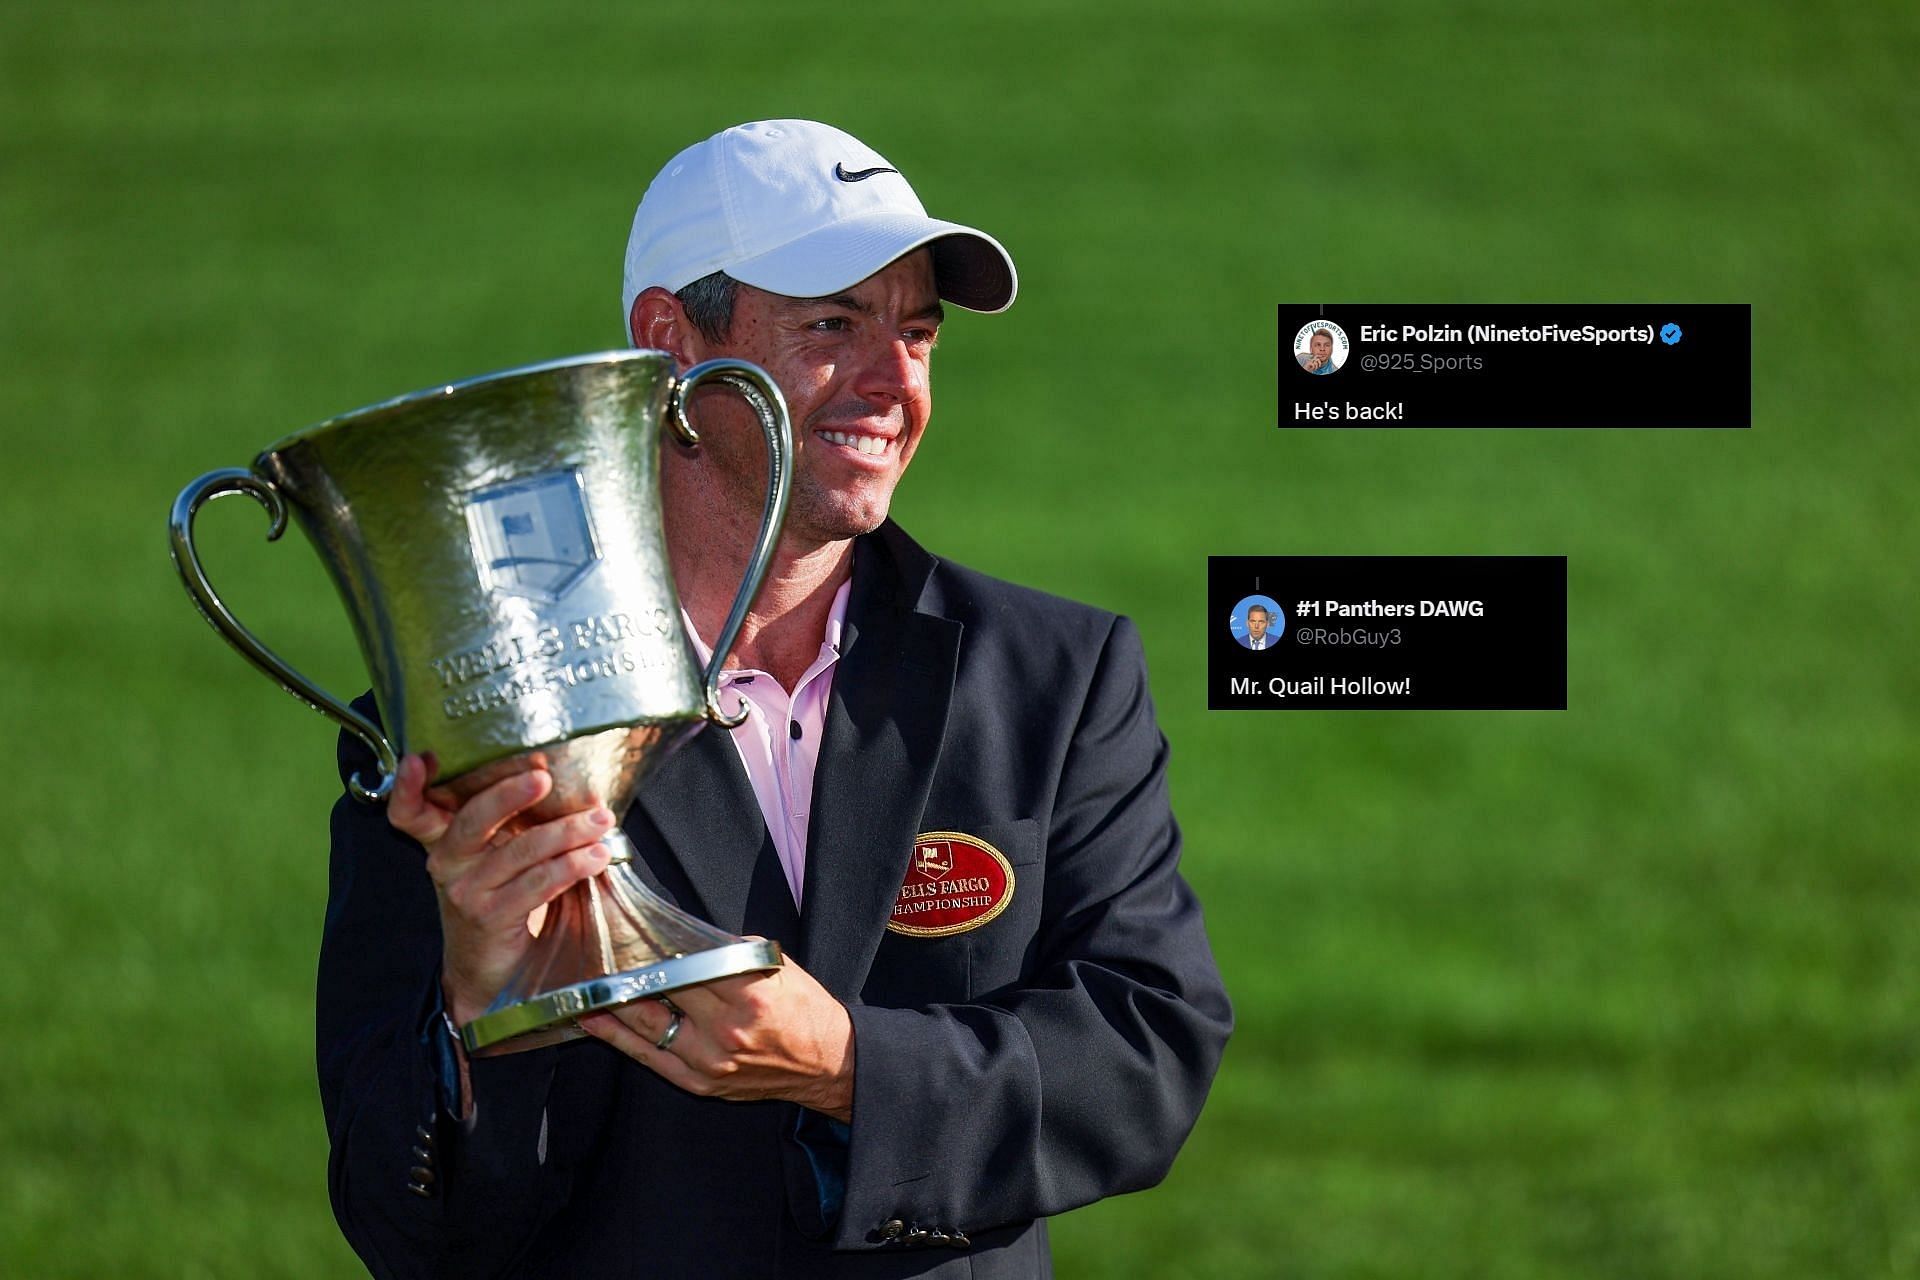 Rory McIlroy poses with the trophy after winning the Wells Fargo Championship